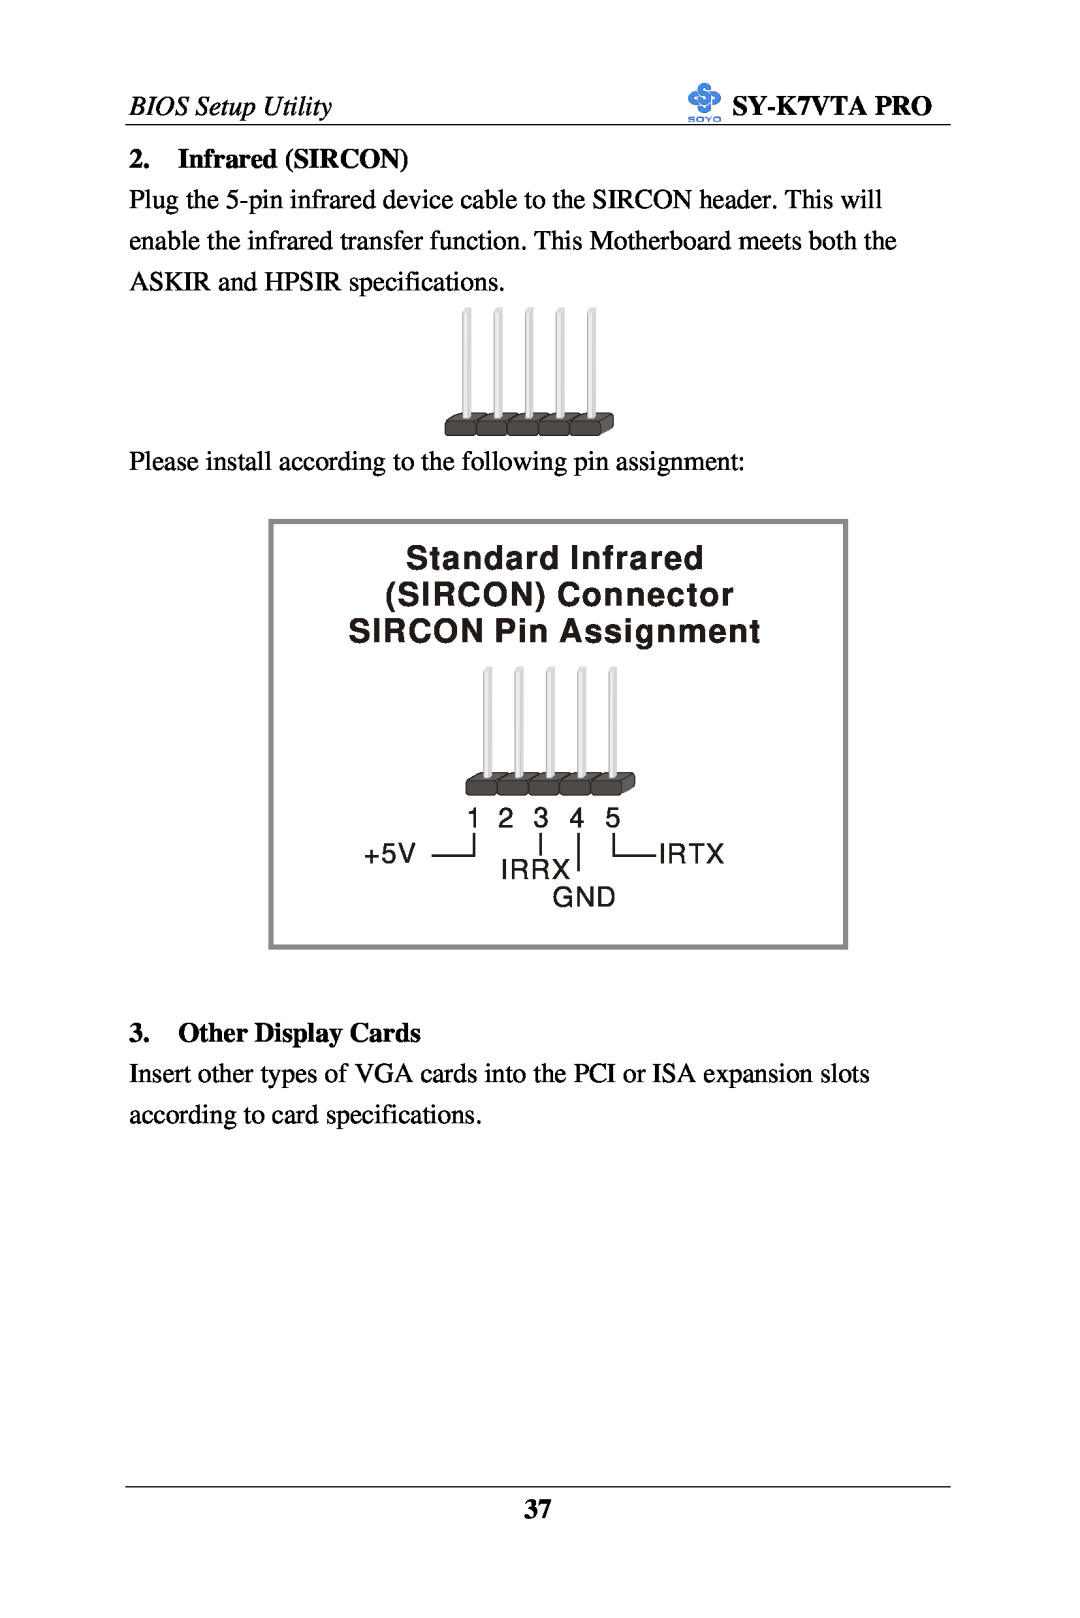 SOYO SY-K7VTA PRO Standard Infrared SIRCON Connector SIRCON Pin Assignment, 1 2 3 4, Irrx Gnd, Irtx, BIOS Setup Utility 